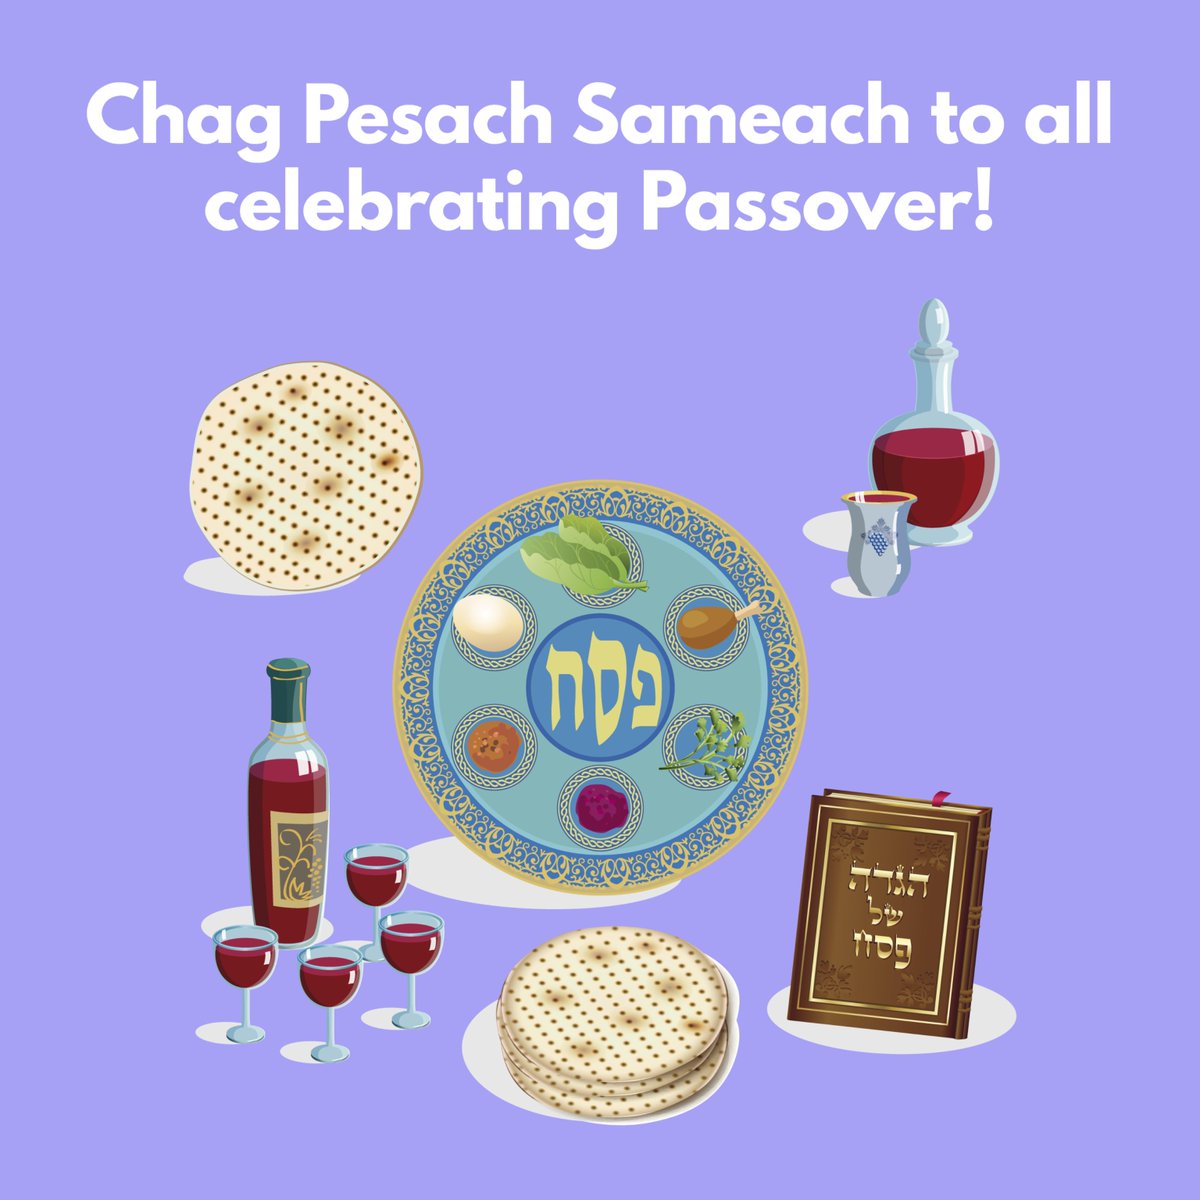 🥳 Wishing a joyous Passover to all who celebrate! May this Passover bring blessings of peace, freedom, and happiness. Chag Sameach! #Passover